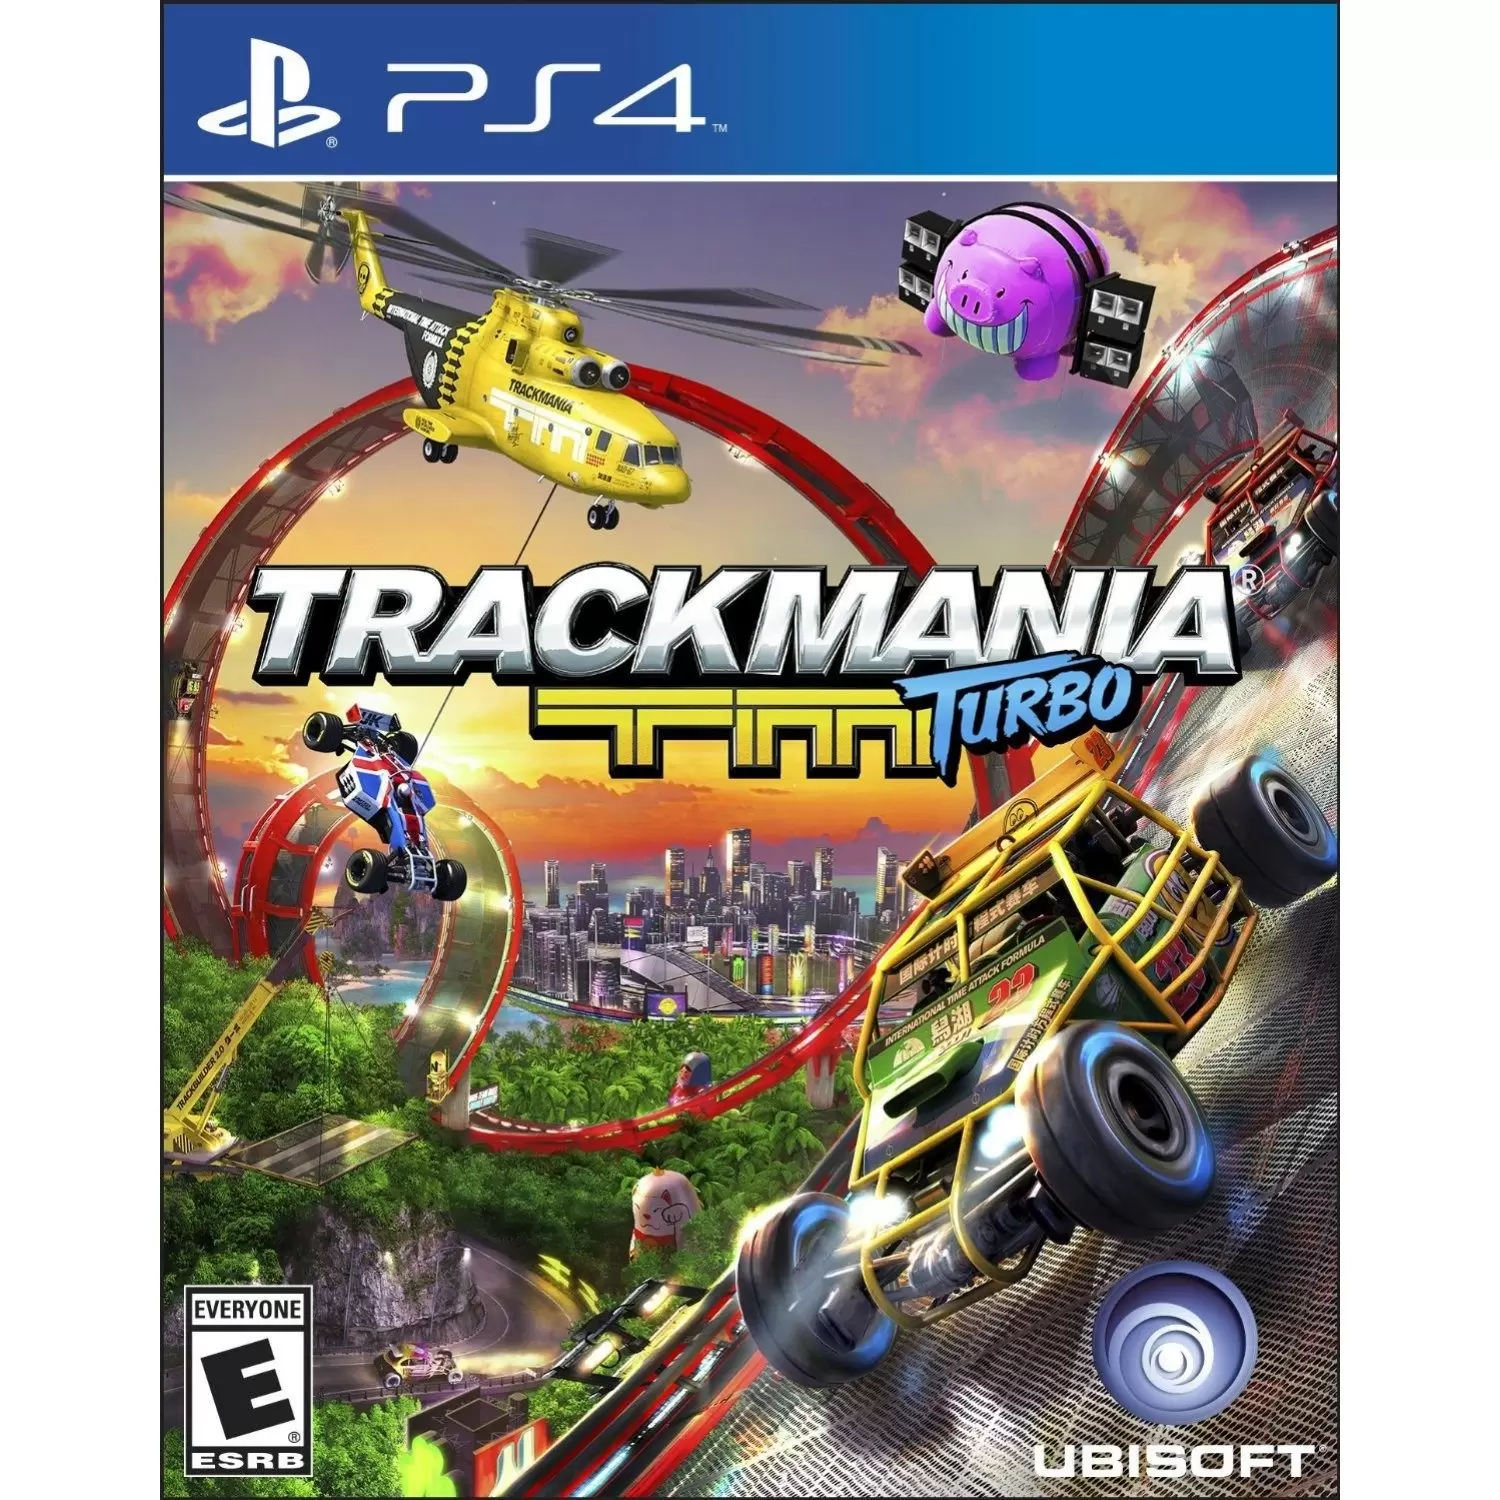 PS4 Games - Trackmania Turbo